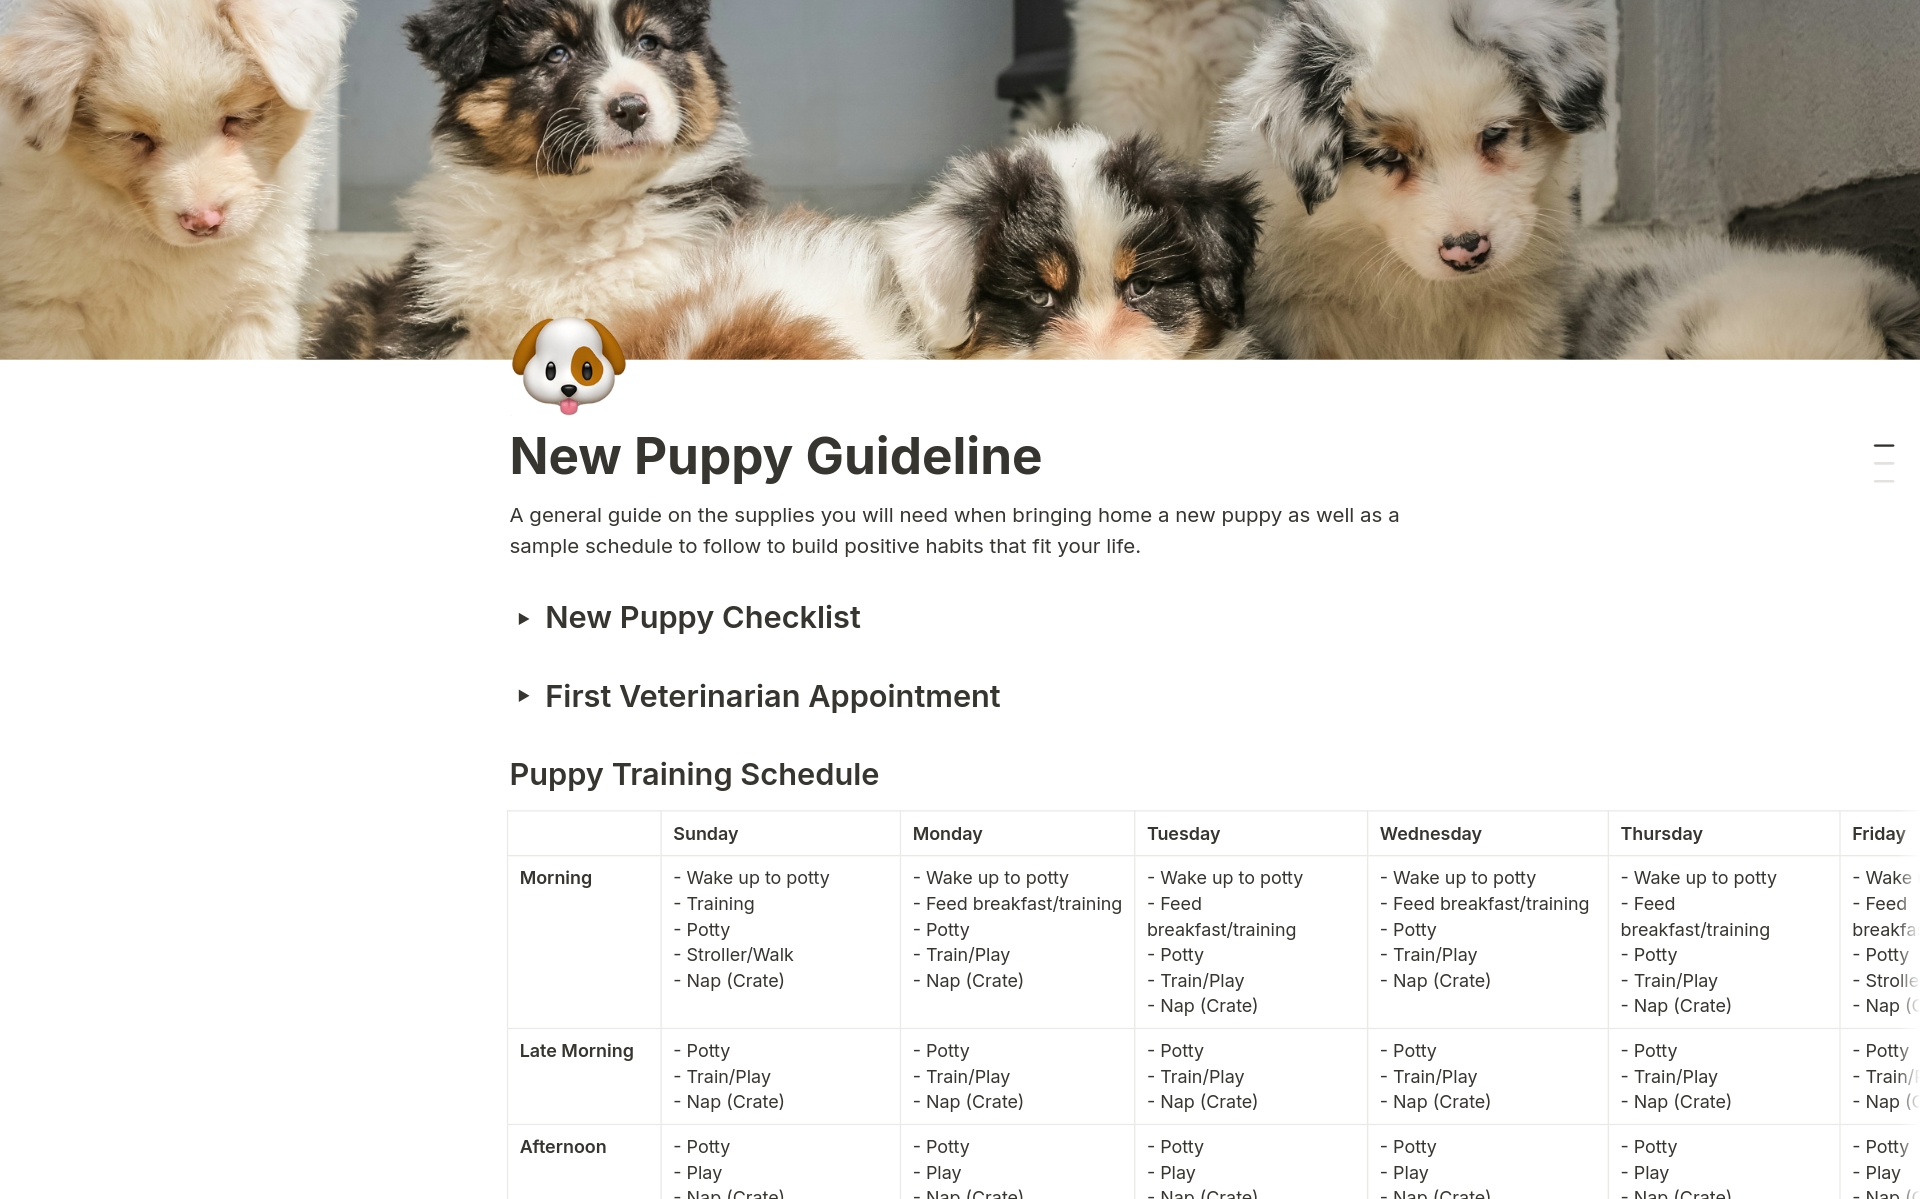 A template preview for New Puppy Guideline